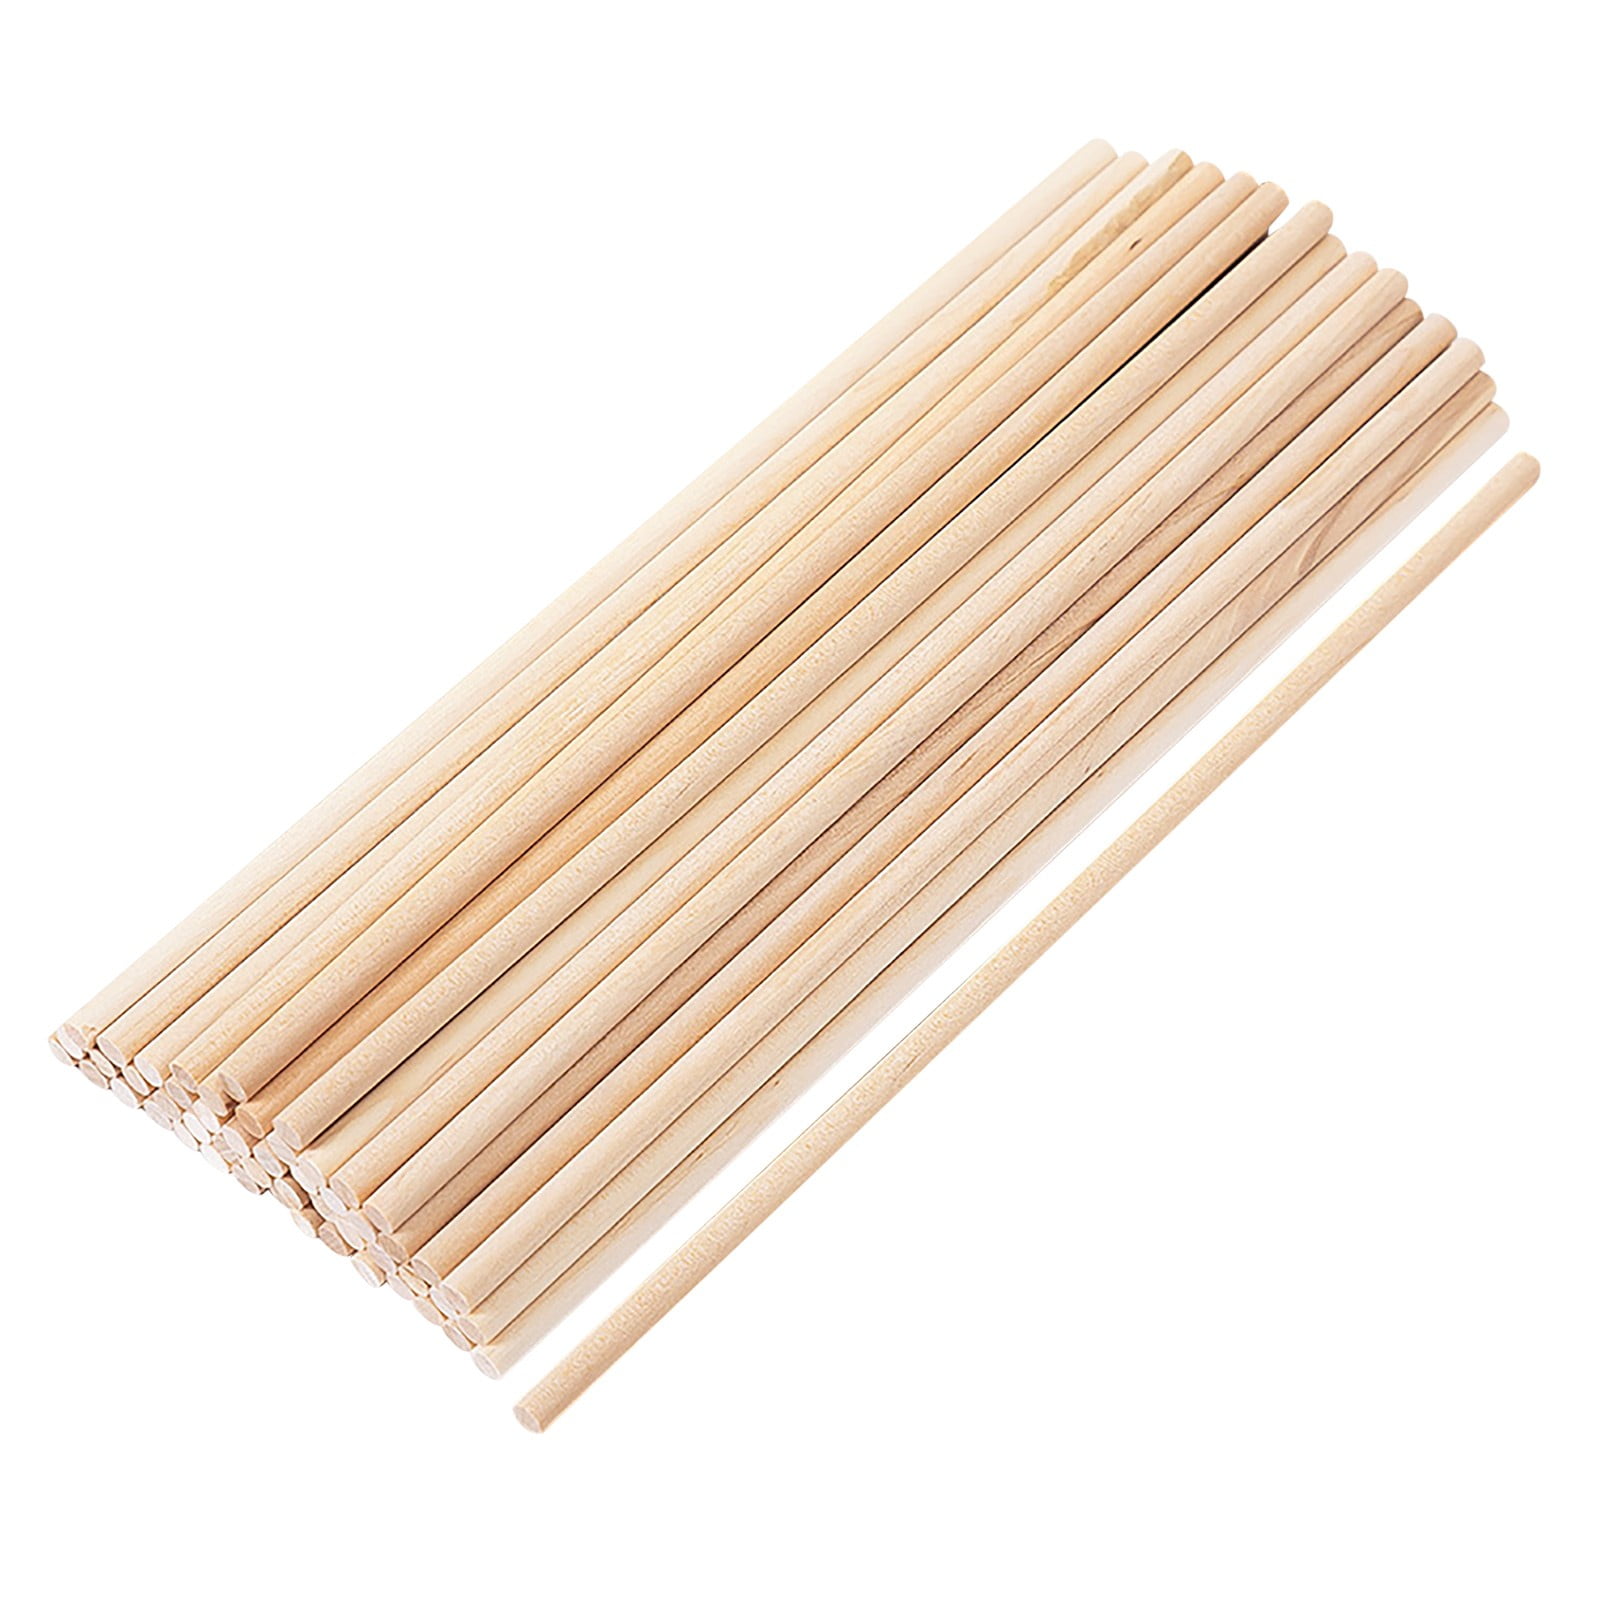 Baker Ross FE332 Natural Wooden Construction Sticks - Pack of 200, Wooden Craft Sticks for Kids Arts and Crafts Projects, Ideal for Wood Craft and Mo